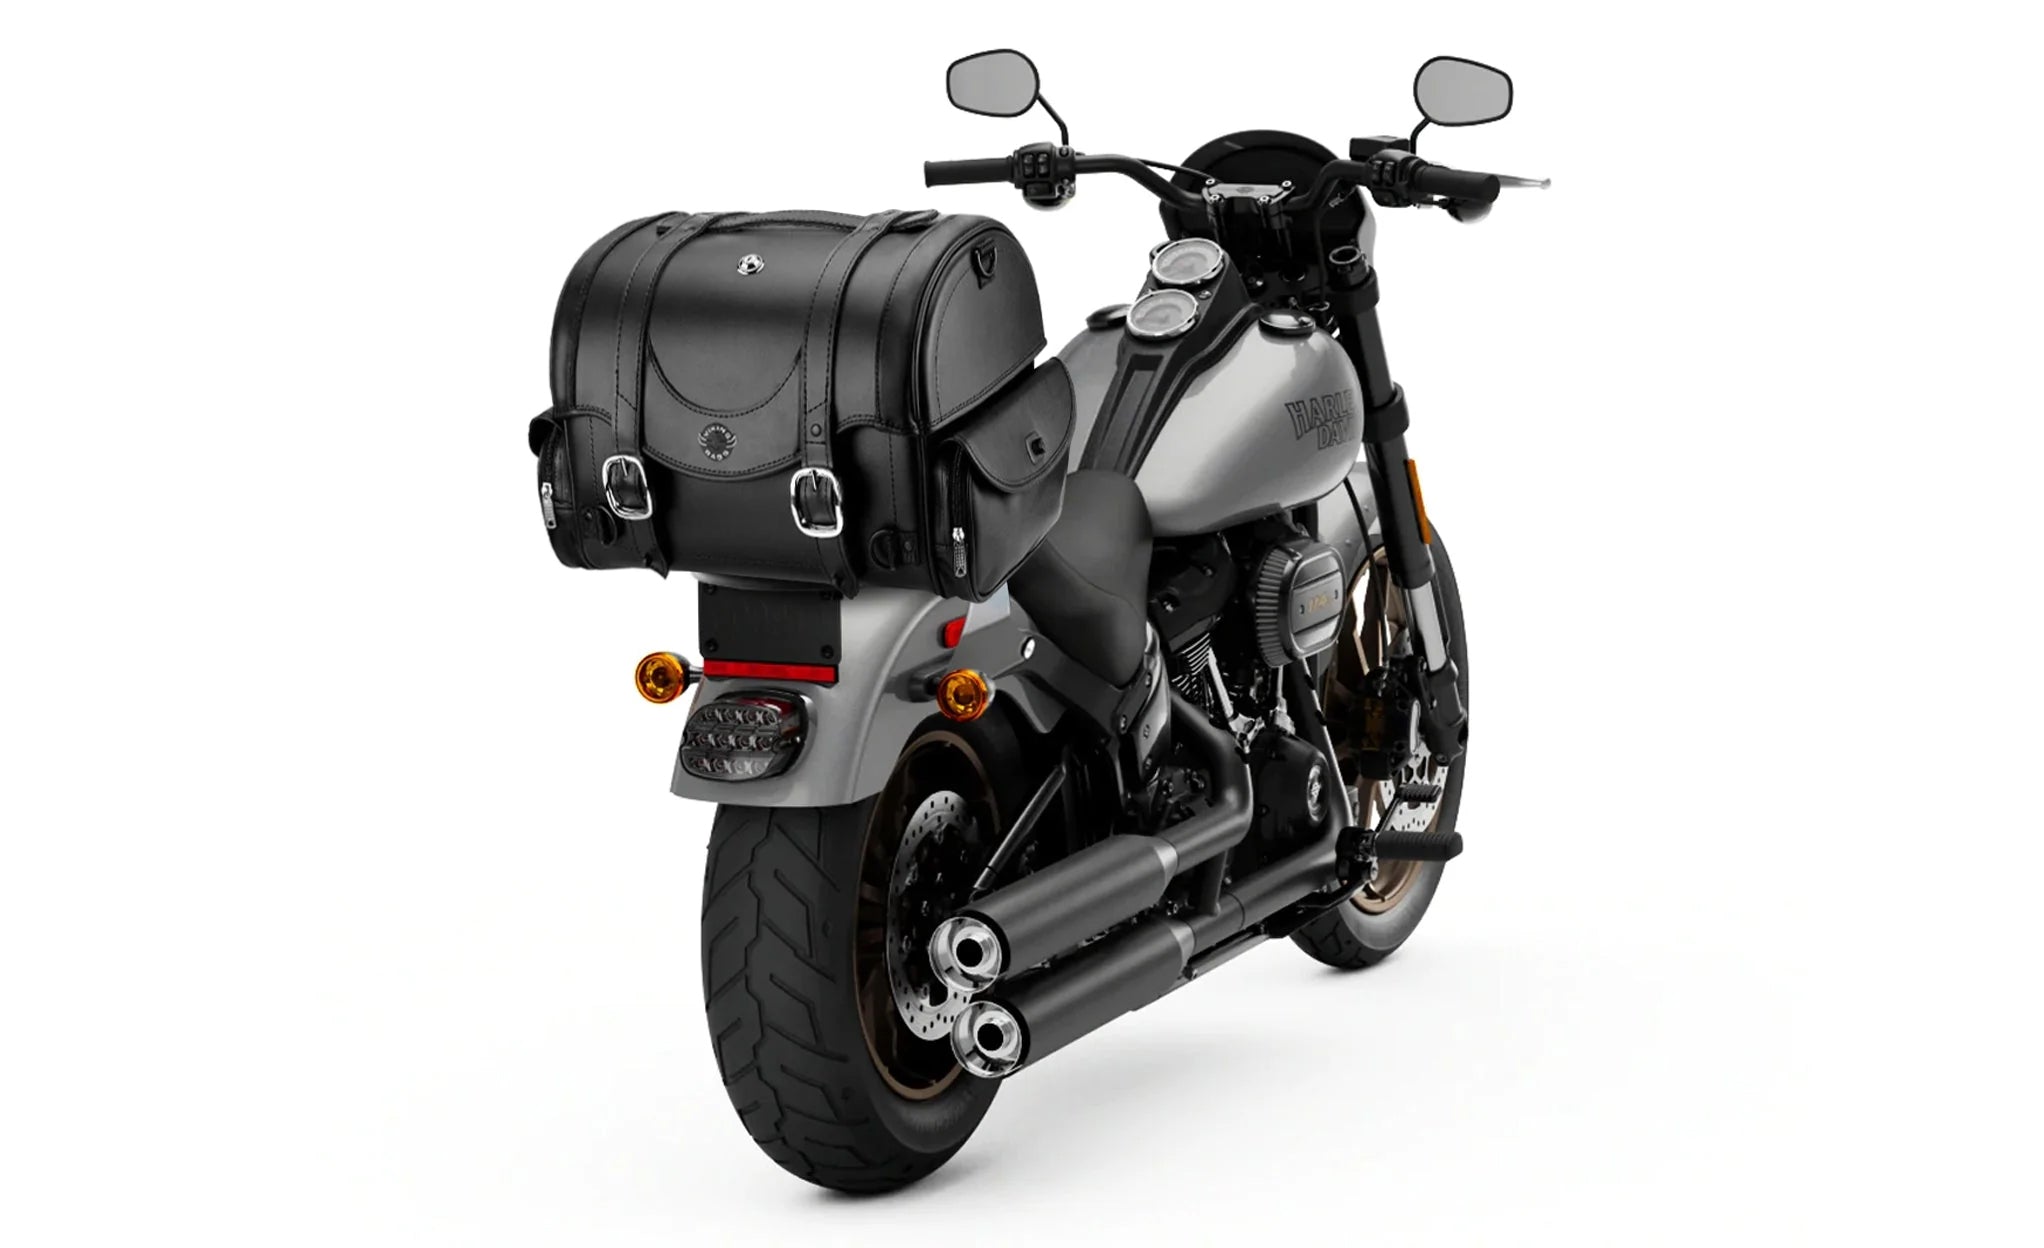 21L - Century Medium Hysoung Leather Motorcycle Roll Bag on Bike Photo @expand